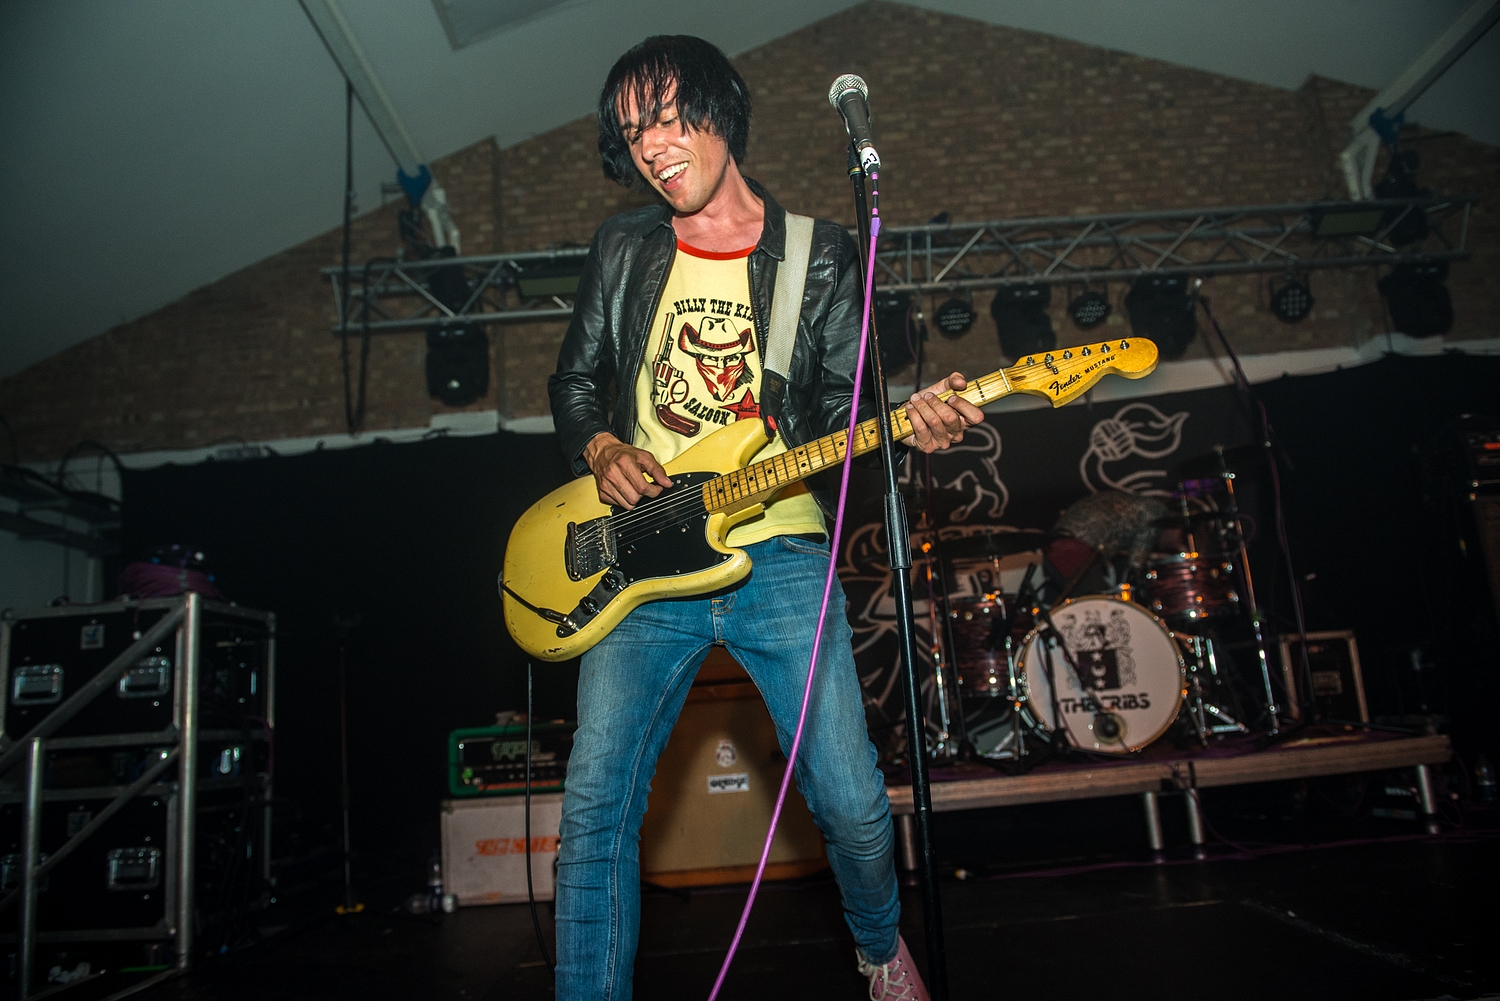 The Cribs, Oval Space, London